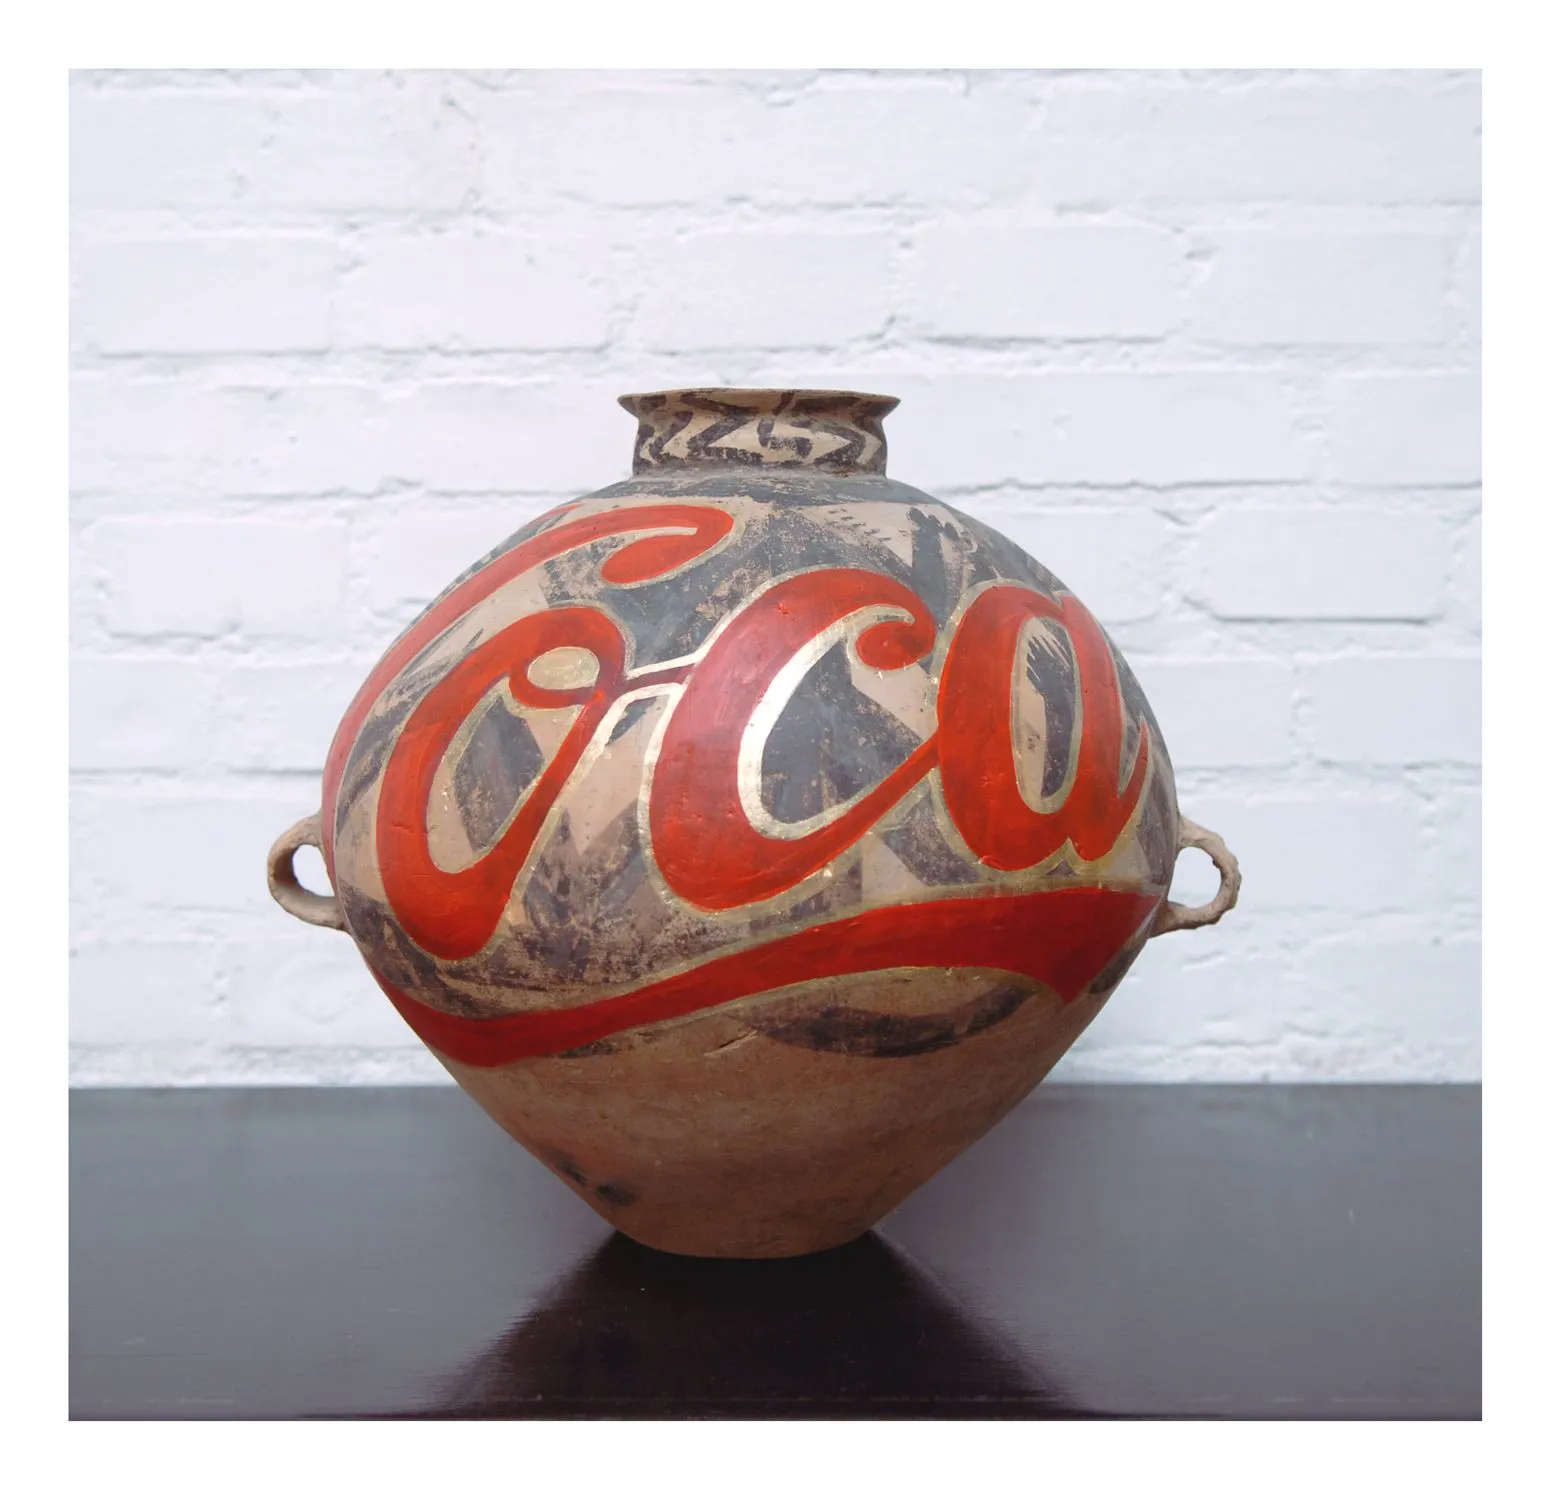 Coca-Cola Vase 1997 vase from Neolithic Age (5000-3000 BCE) paint 11 7/8” x diameter 13” Courtesy Tsai Collection, New York